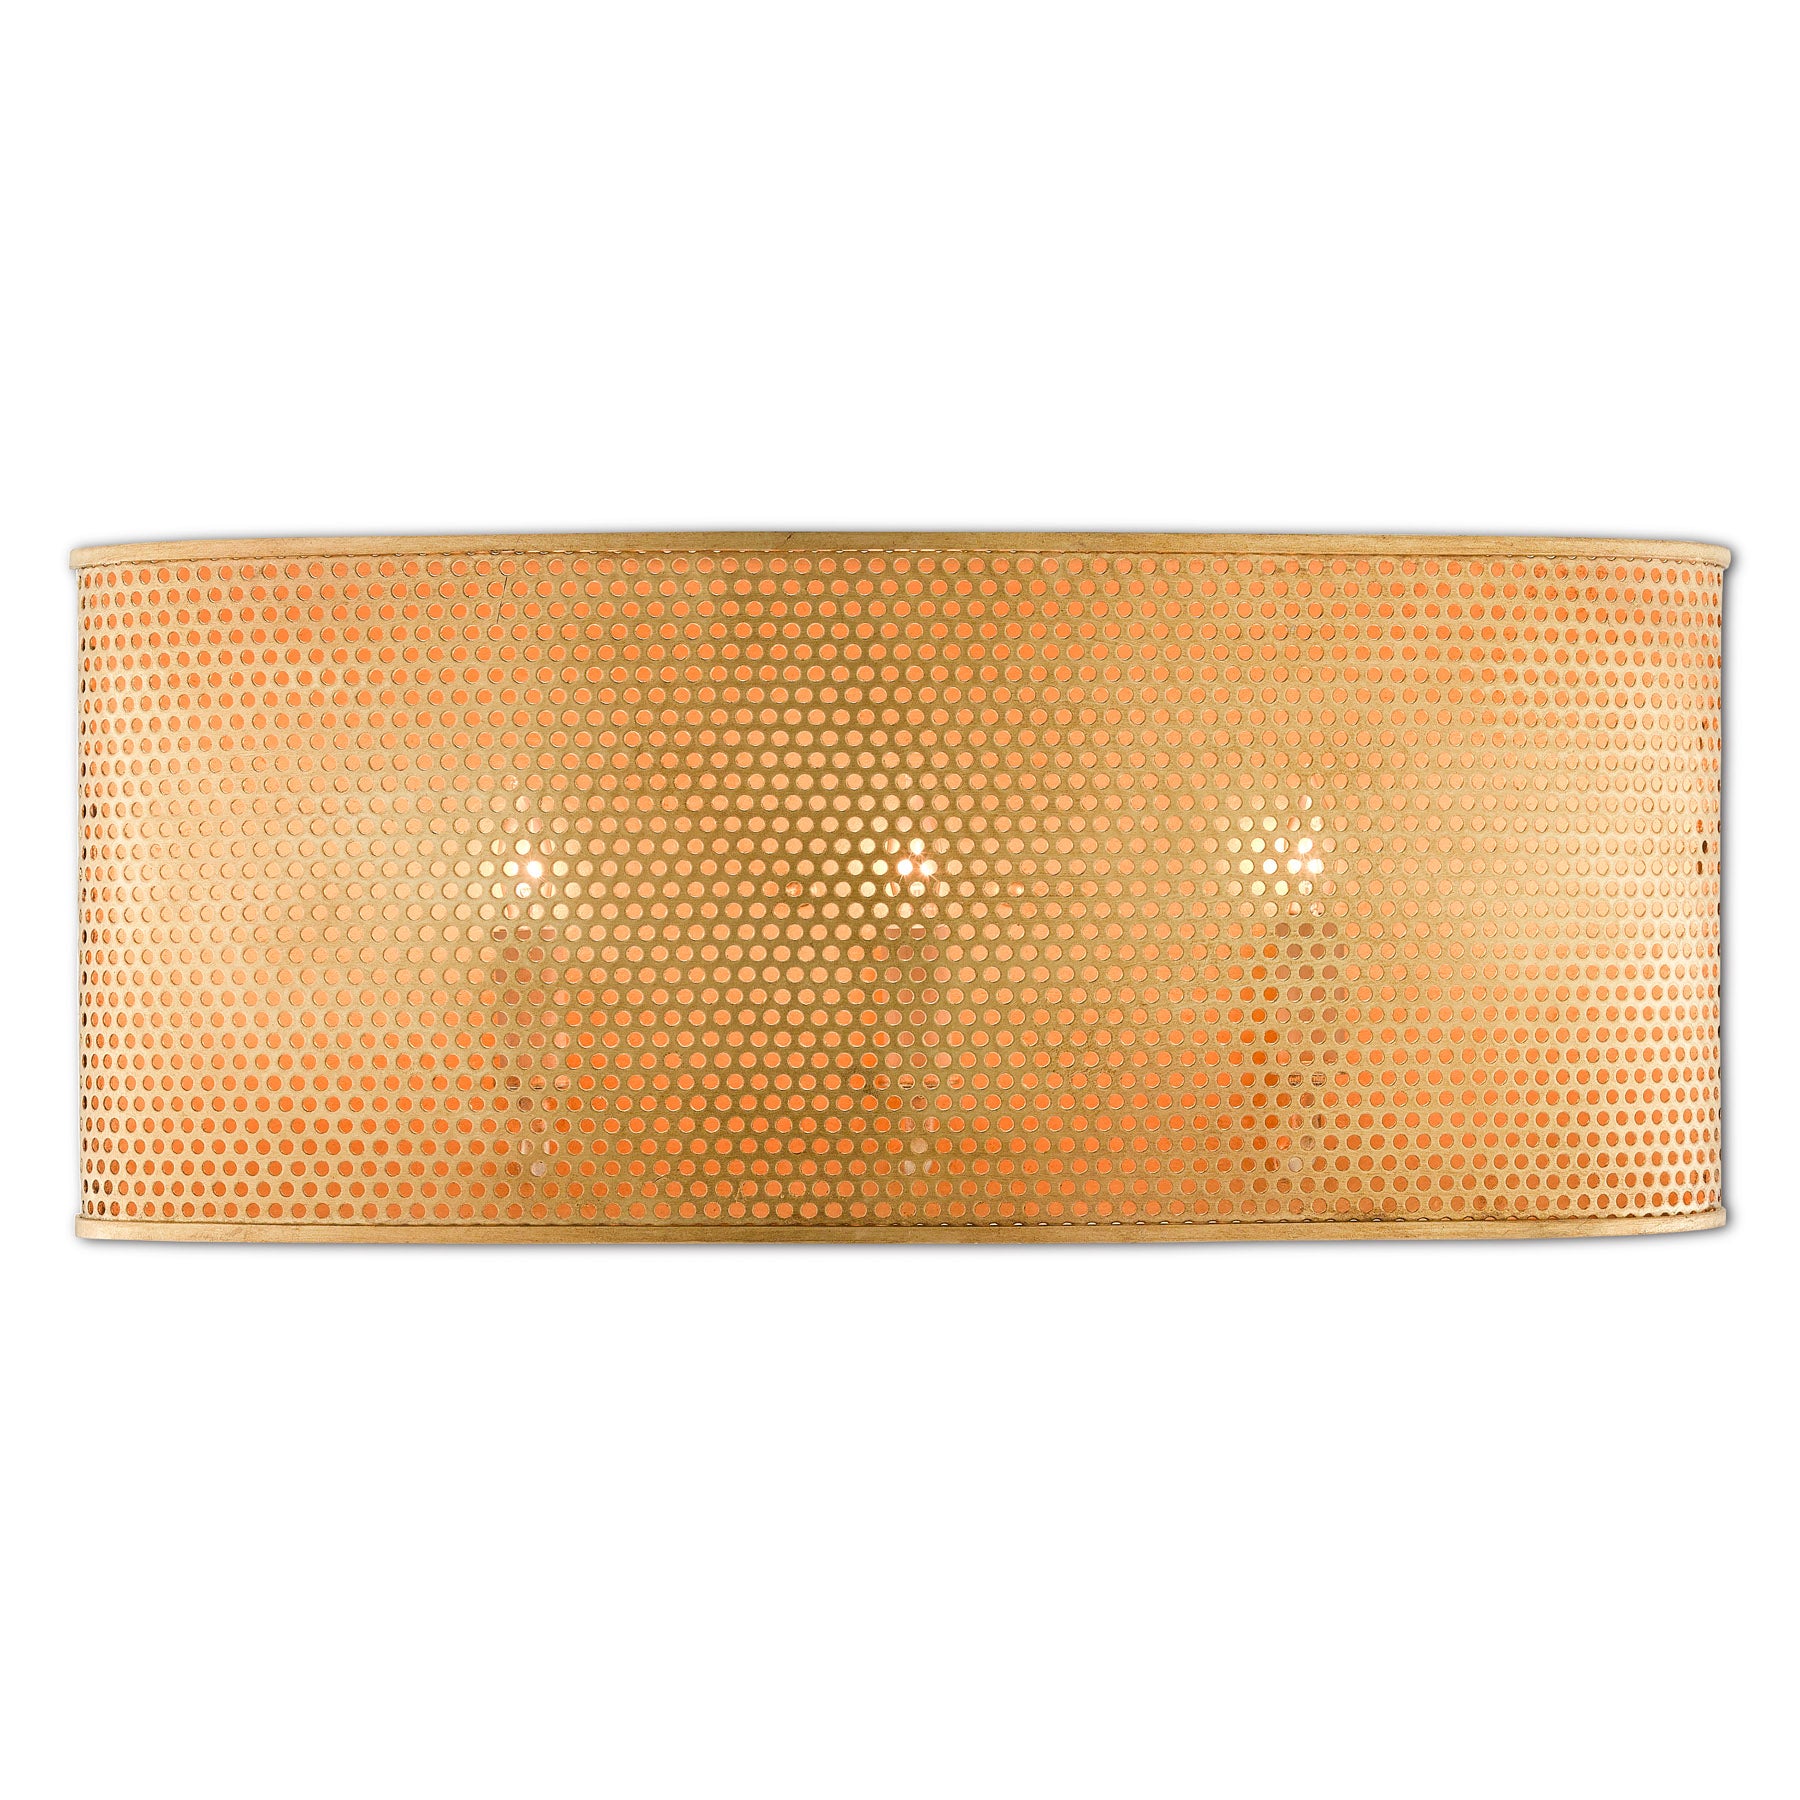 Prothero Wall Sconce